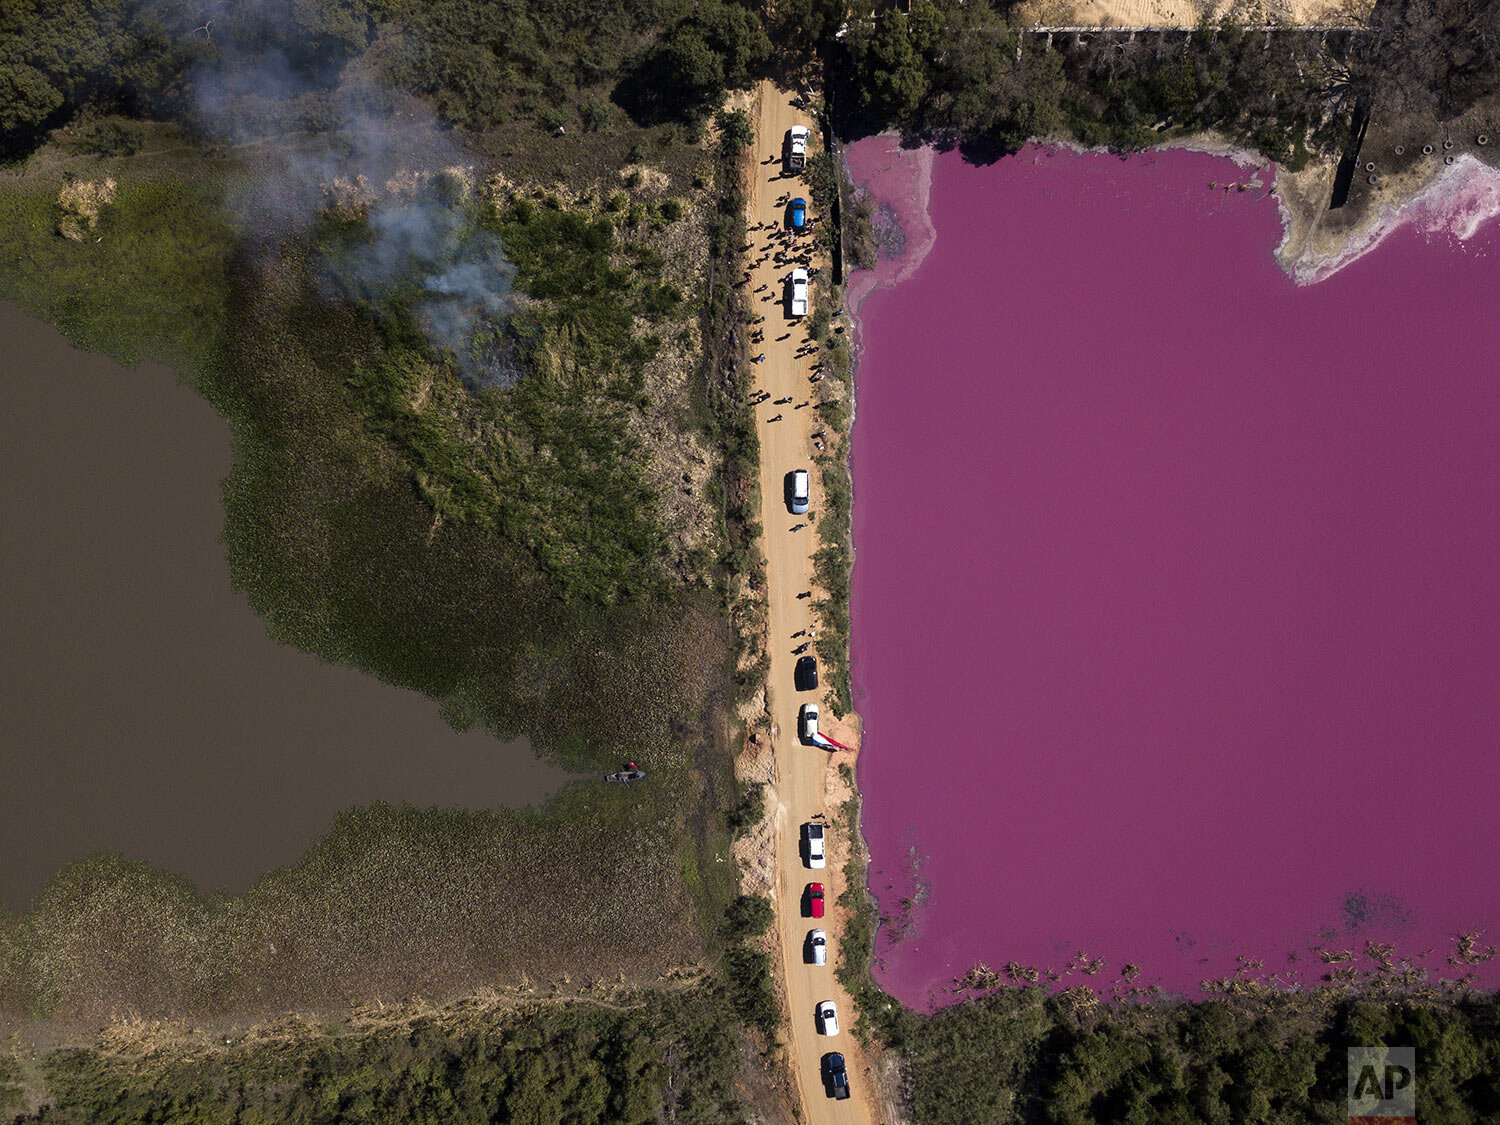  Cars are parked over Cerro Lagoon as the drivers protest the Waltrading S.A. tannery company for dumping untreated waste into the lagoon turning the water purple and emitting a foul odor in Limpio, Paraguay, Aug. 22, 2020. (AP Photo/Jorge Saenz) 